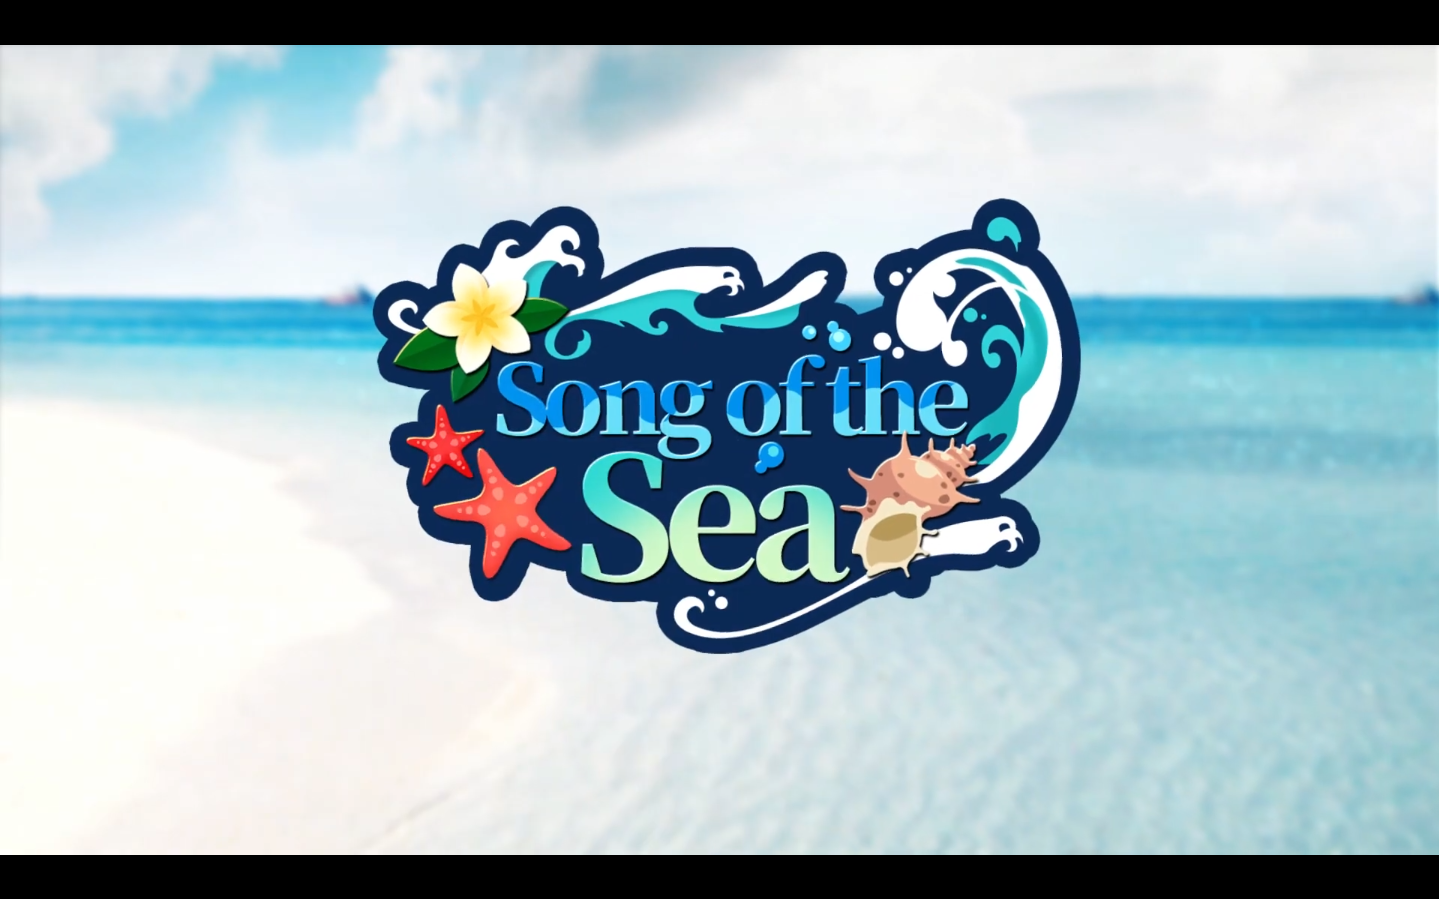 Song of the Sea: Wallpaper